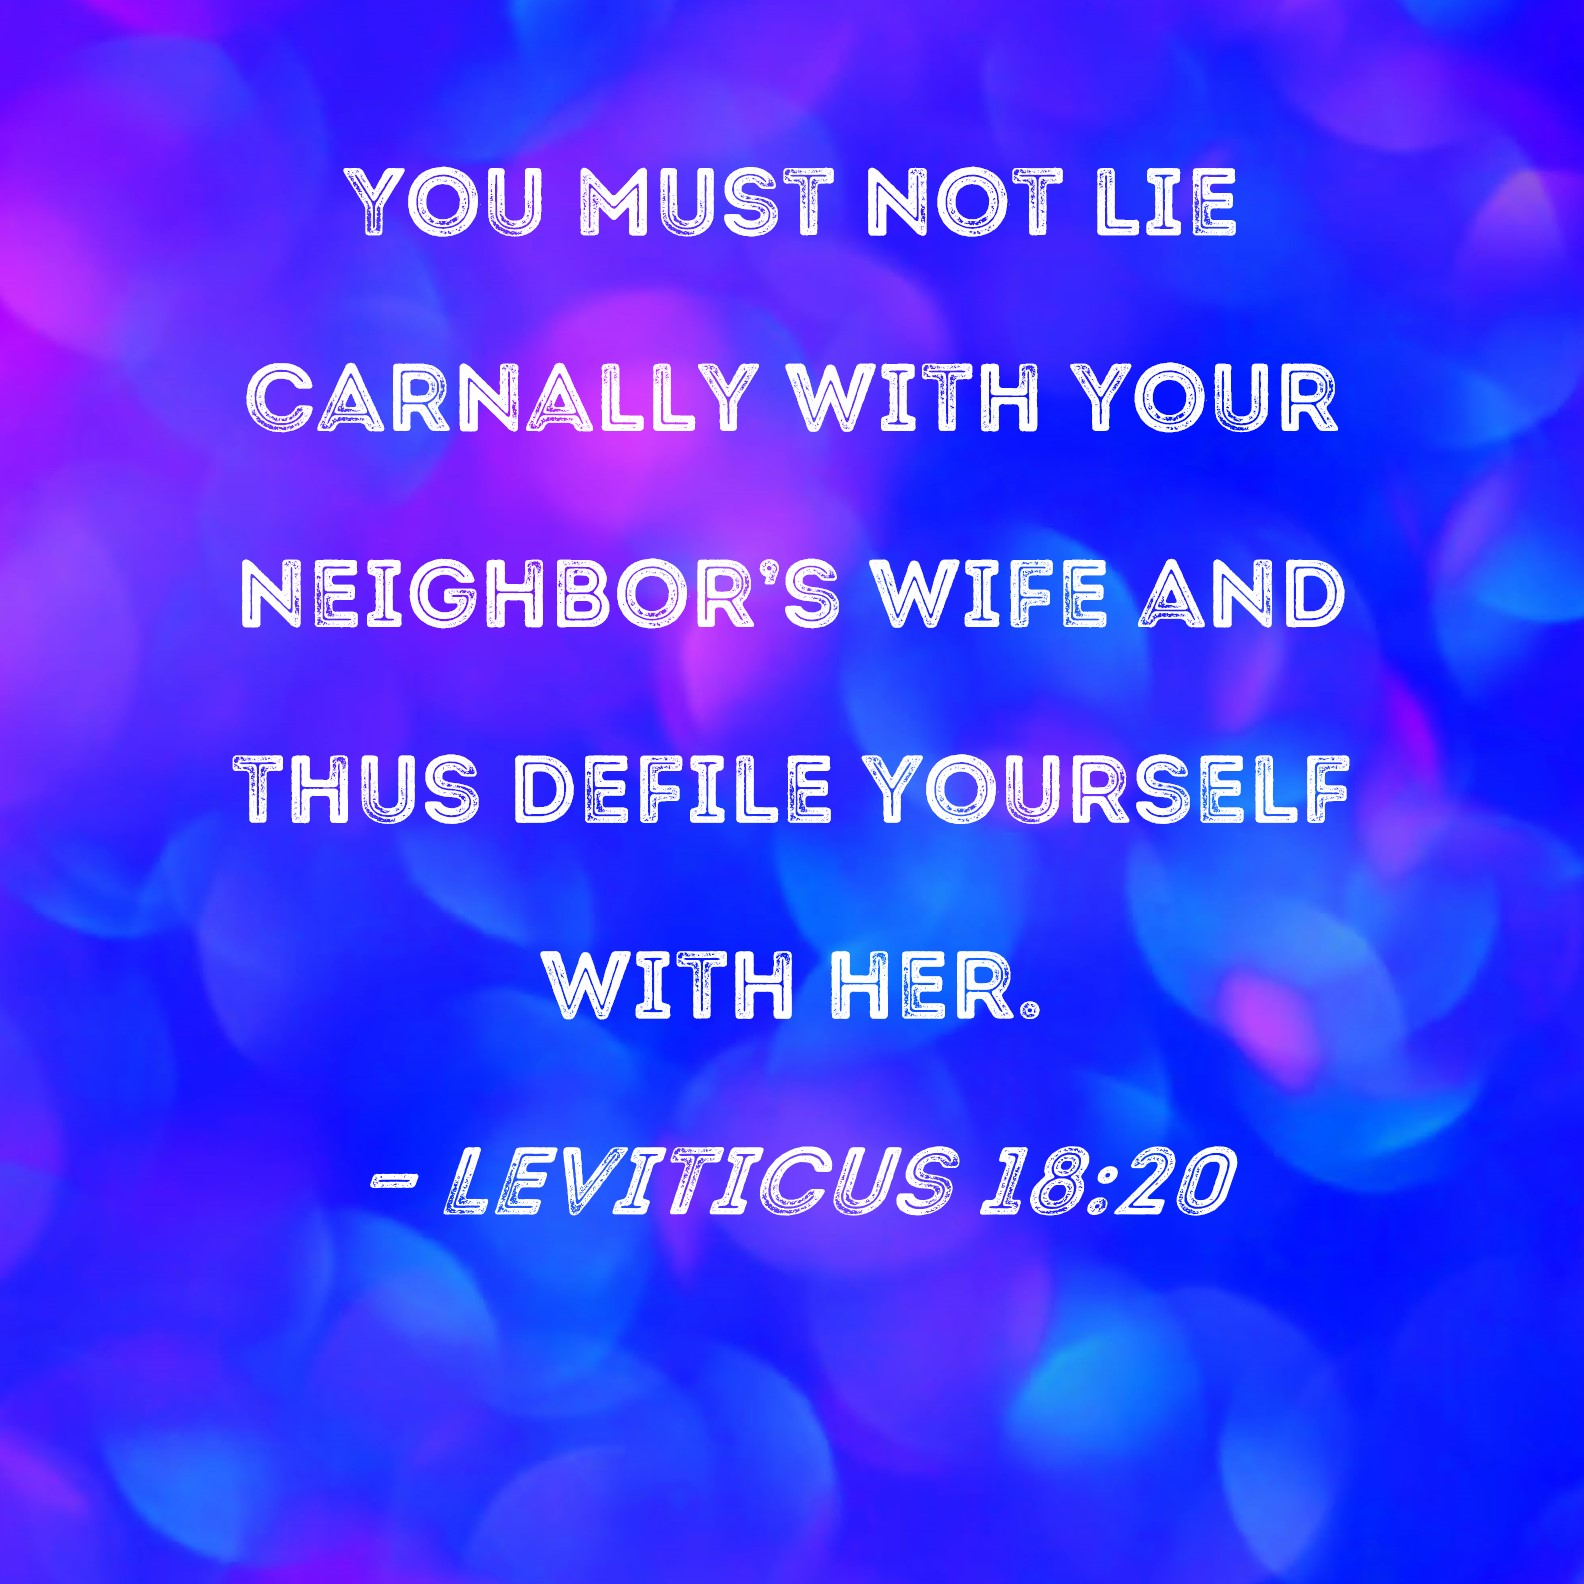 Leviticus 1820 You must not lie carnally with your neighbors wife and thus defile yourself with her. pic